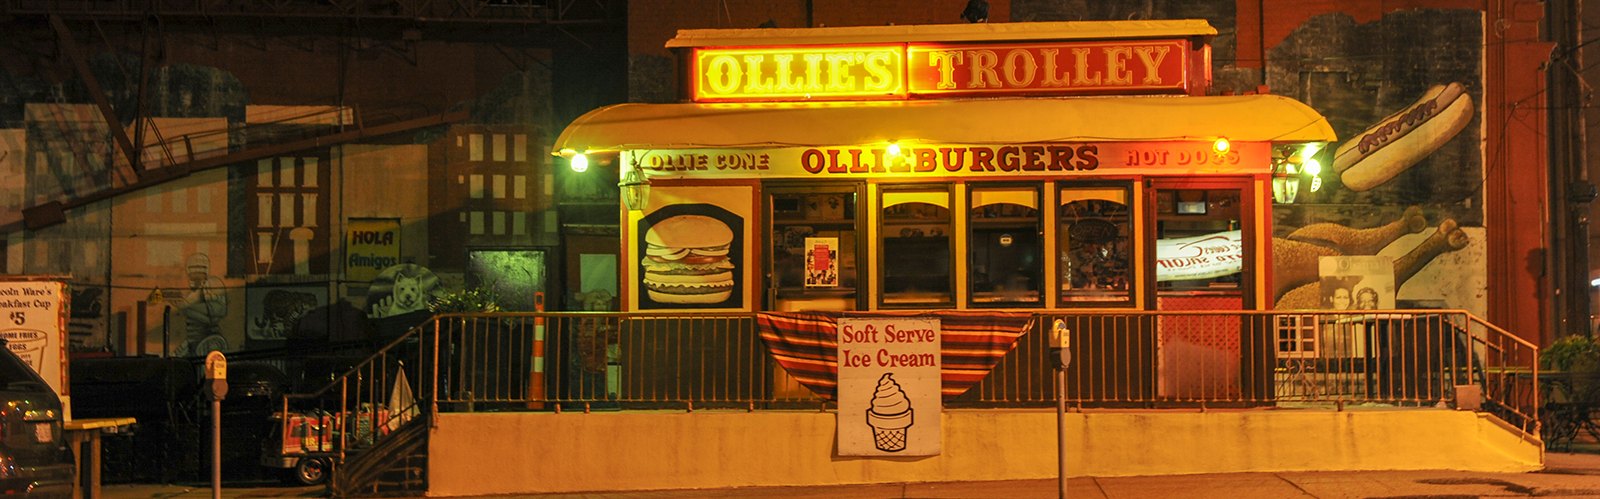 Nighttime at Ollie's Trolley at the corner of Liberty Street and Central Avenue